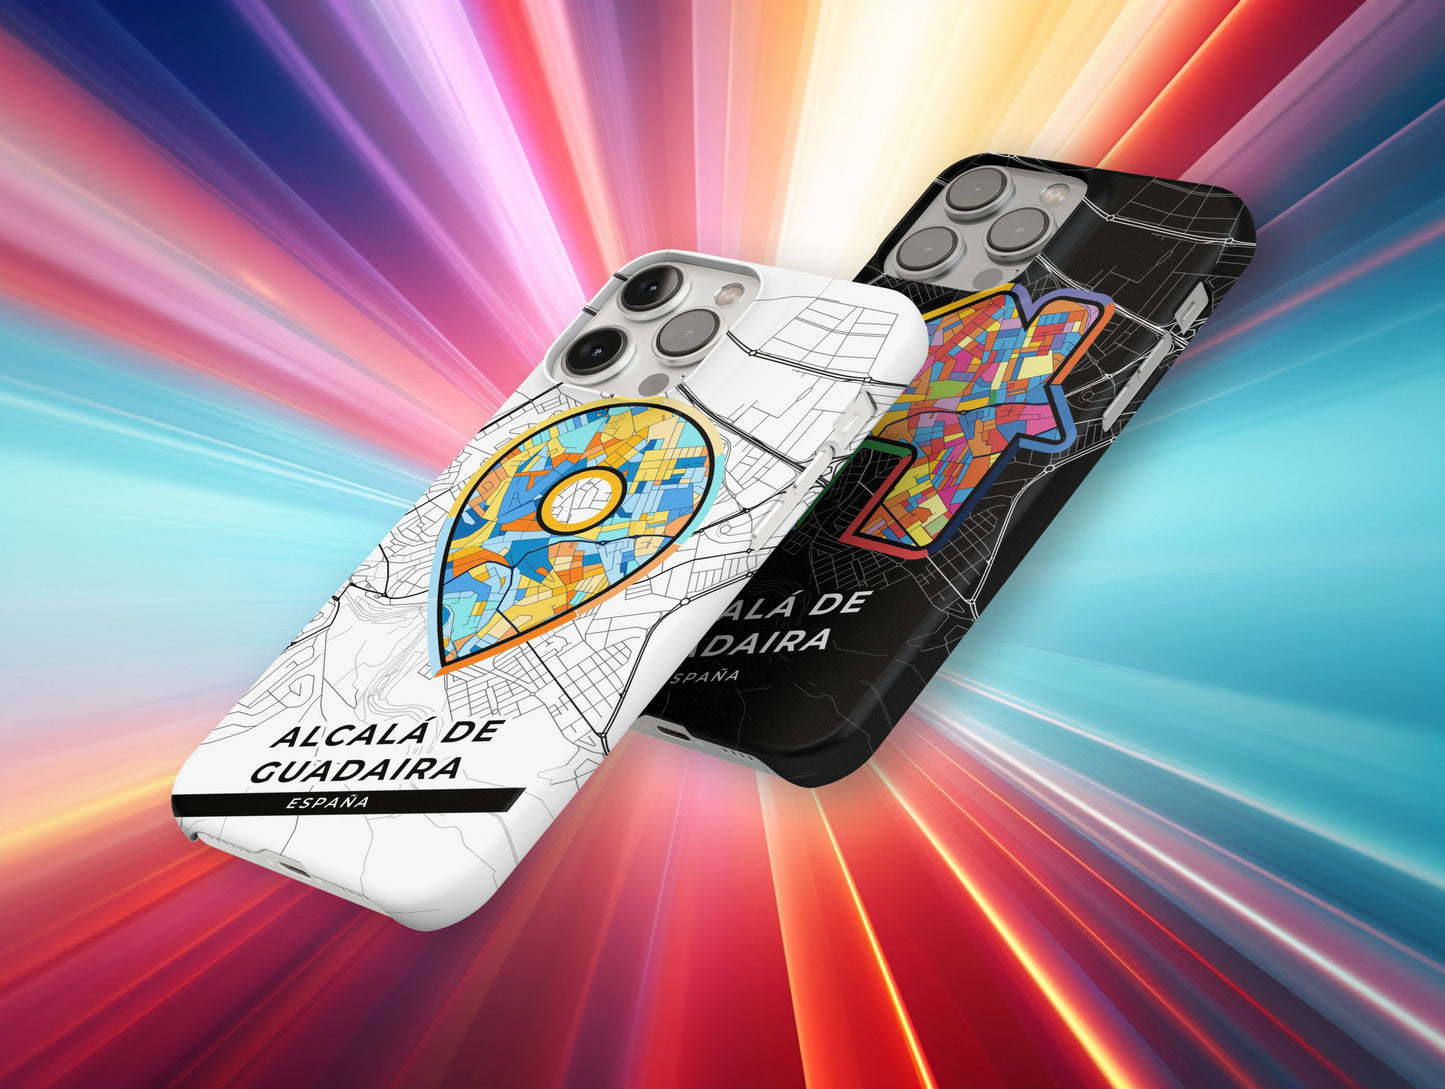 Alcalá De Guadaira Spain slim phone case with colorful icon. Birthday, wedding or housewarming gift. Couple match cases.